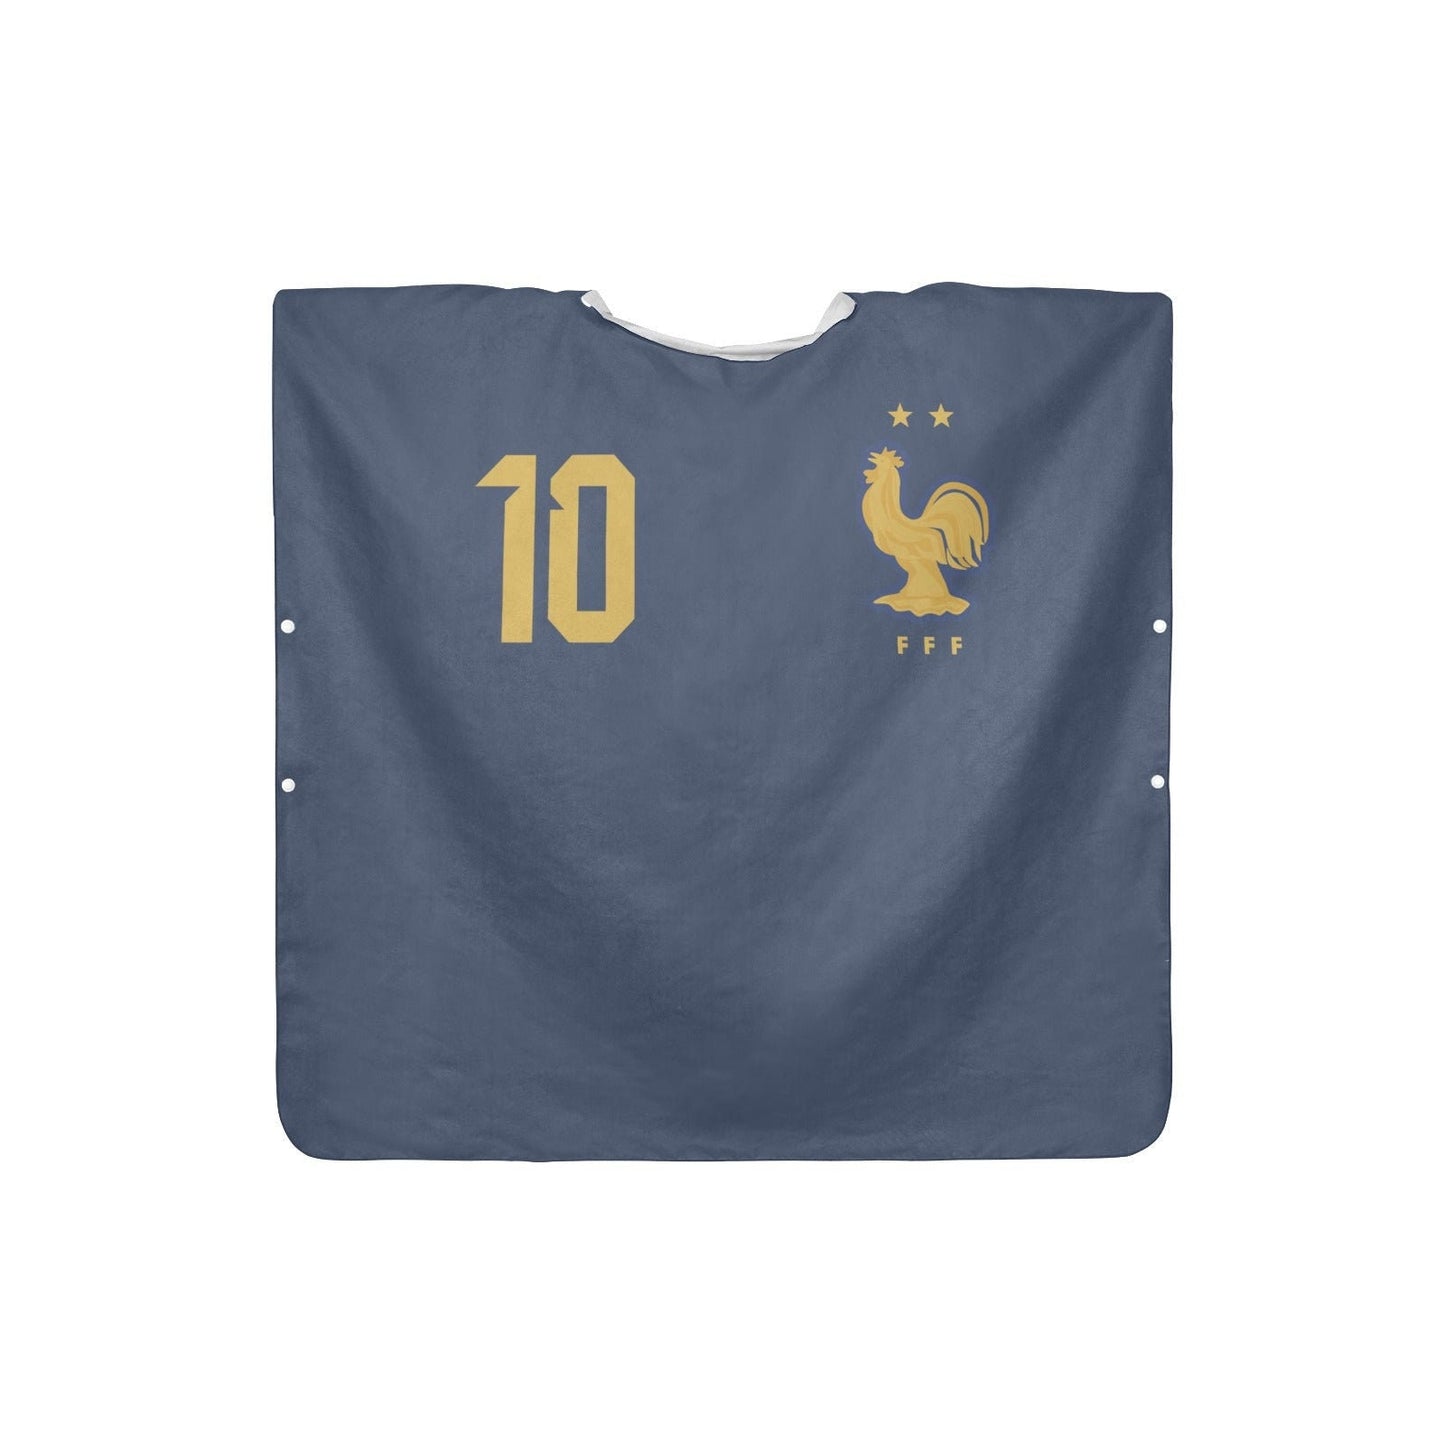 Kylian Mbappe 10 • Hooded Towel • FIFA World Cup • France World Cup 10 • Personalized FIFA